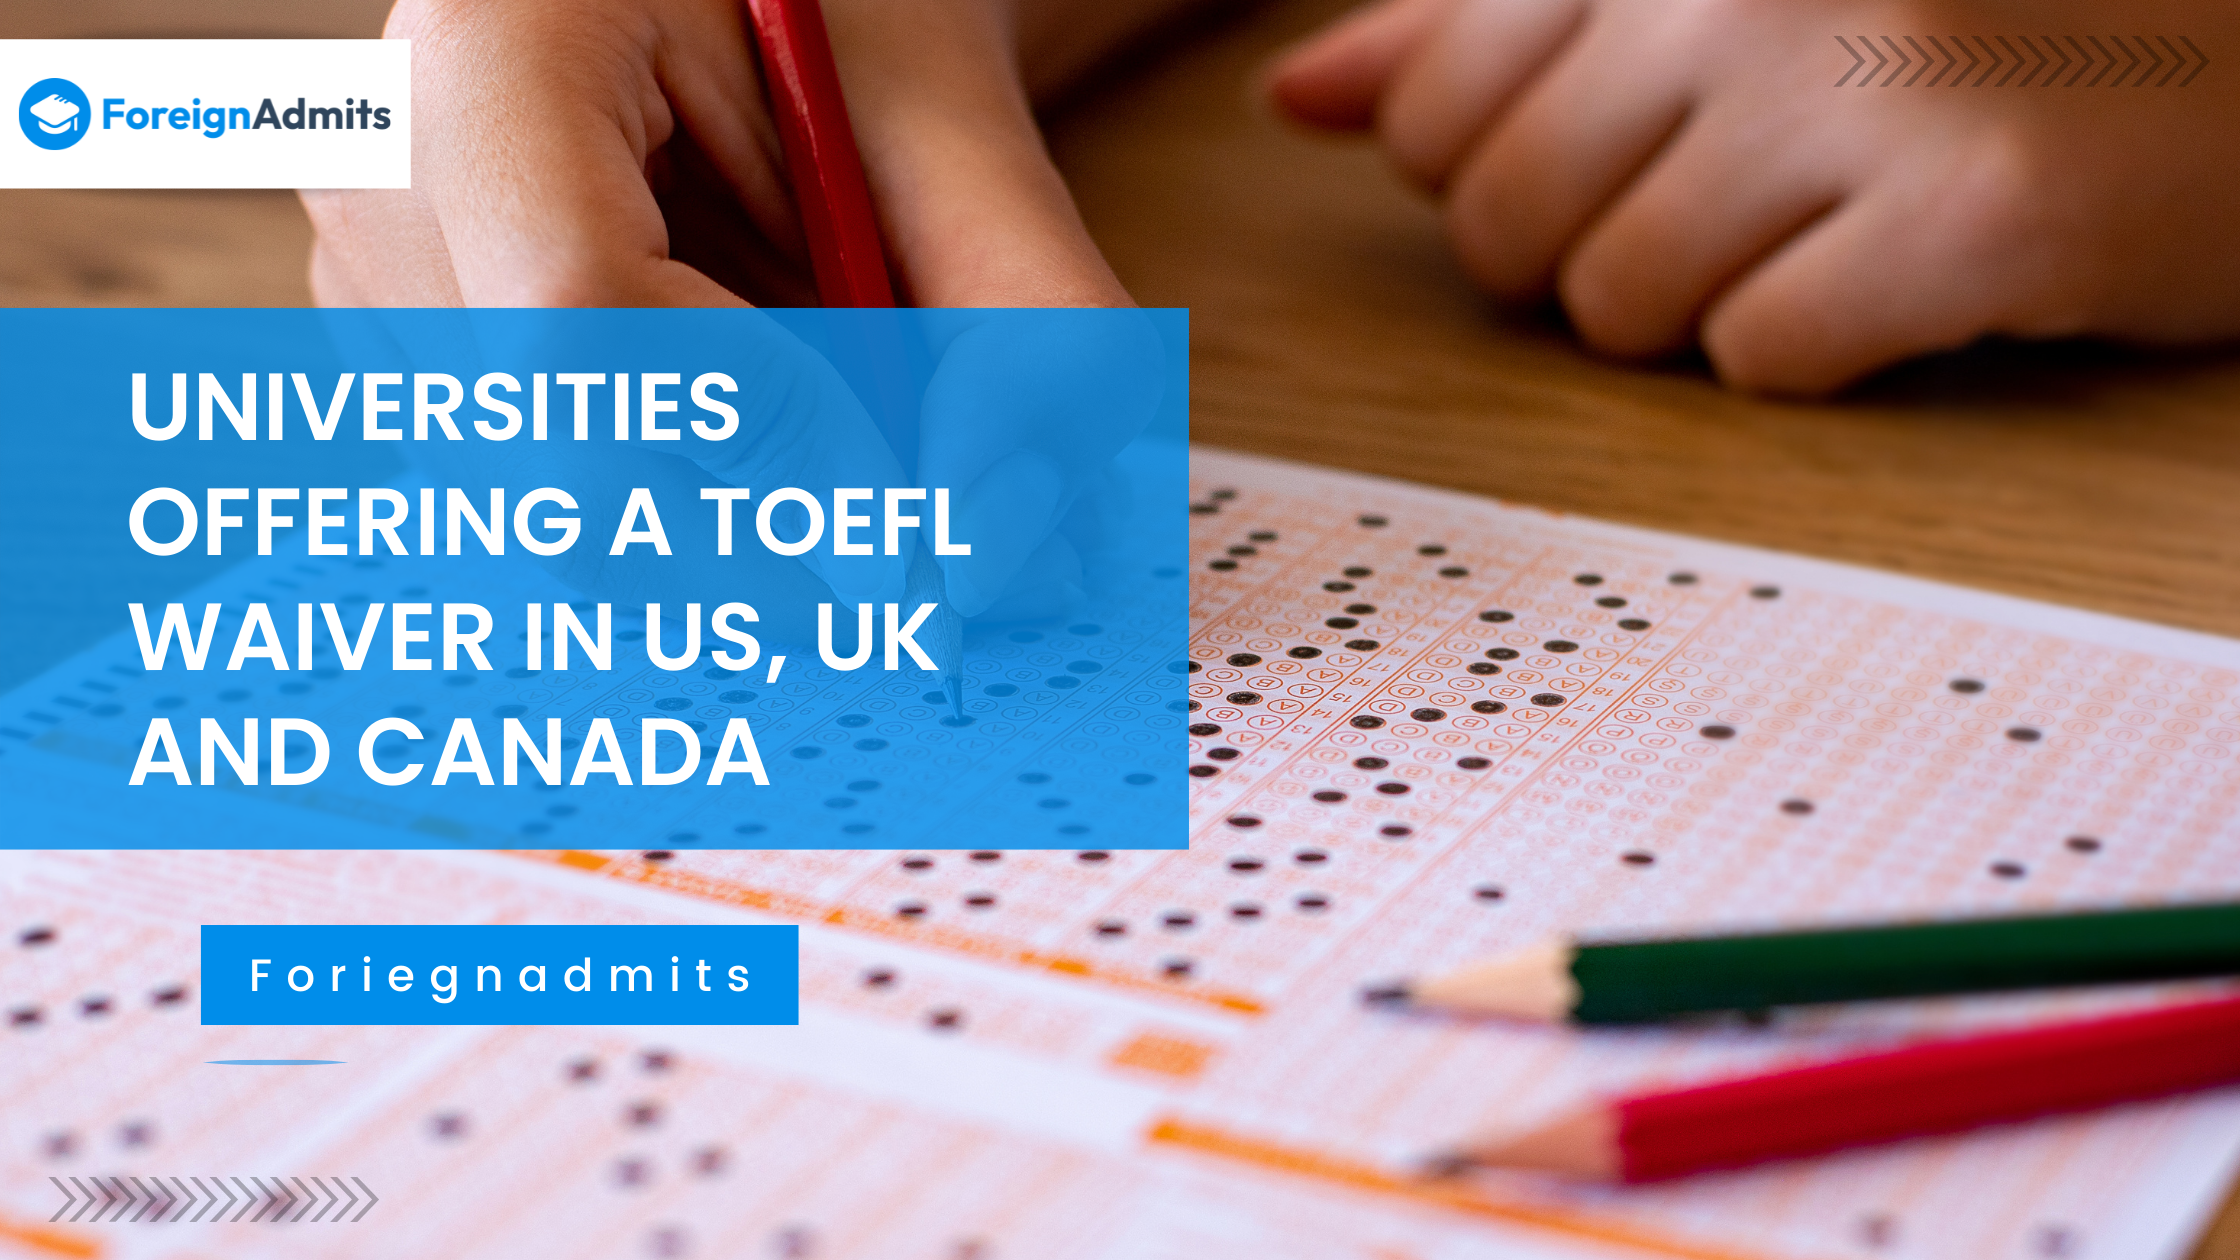 Universities offering a TOEFL waiver in US, UK and Canada